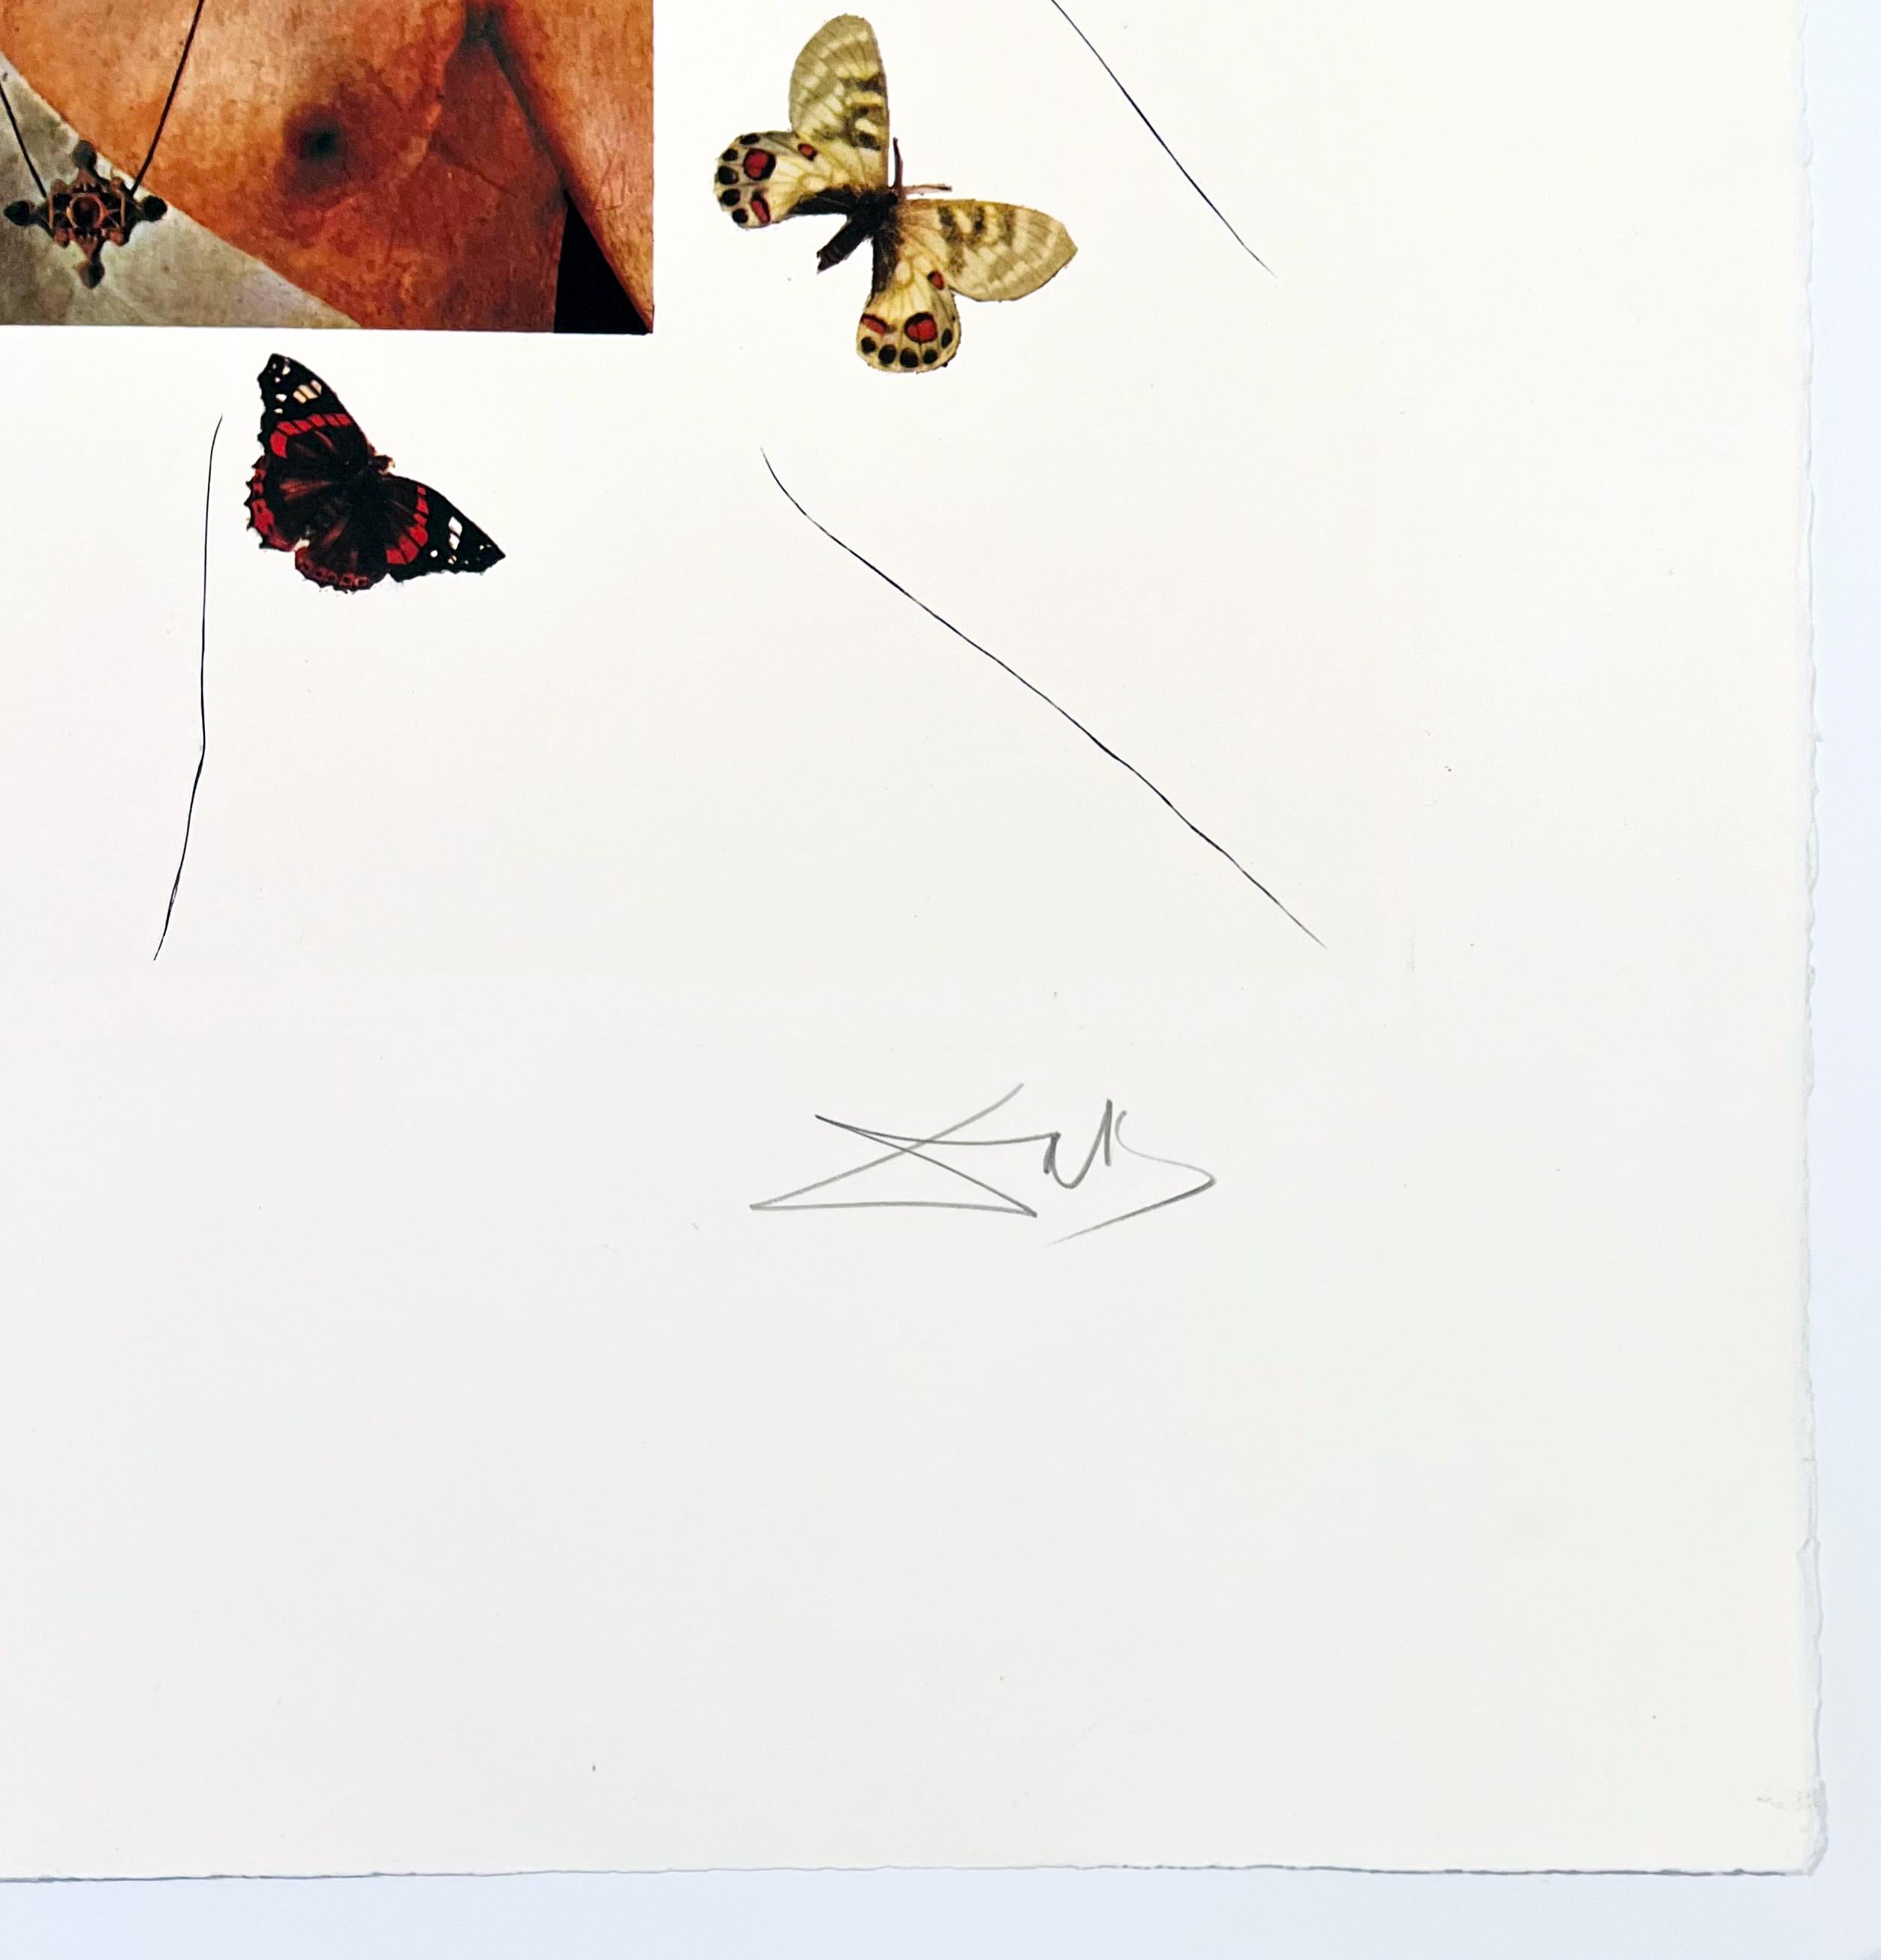 Artist: Salvador Dali
Title: Surrealist Portrait of Dali Surrounded by Butterflies
Portfolio: Memories of Surrealism
Medium: Etching and photolithograph
Date: 1971
Edition: AP XIV/XXV (artist's proof 14/25, aside from the edition of 175)
Sheet Size: